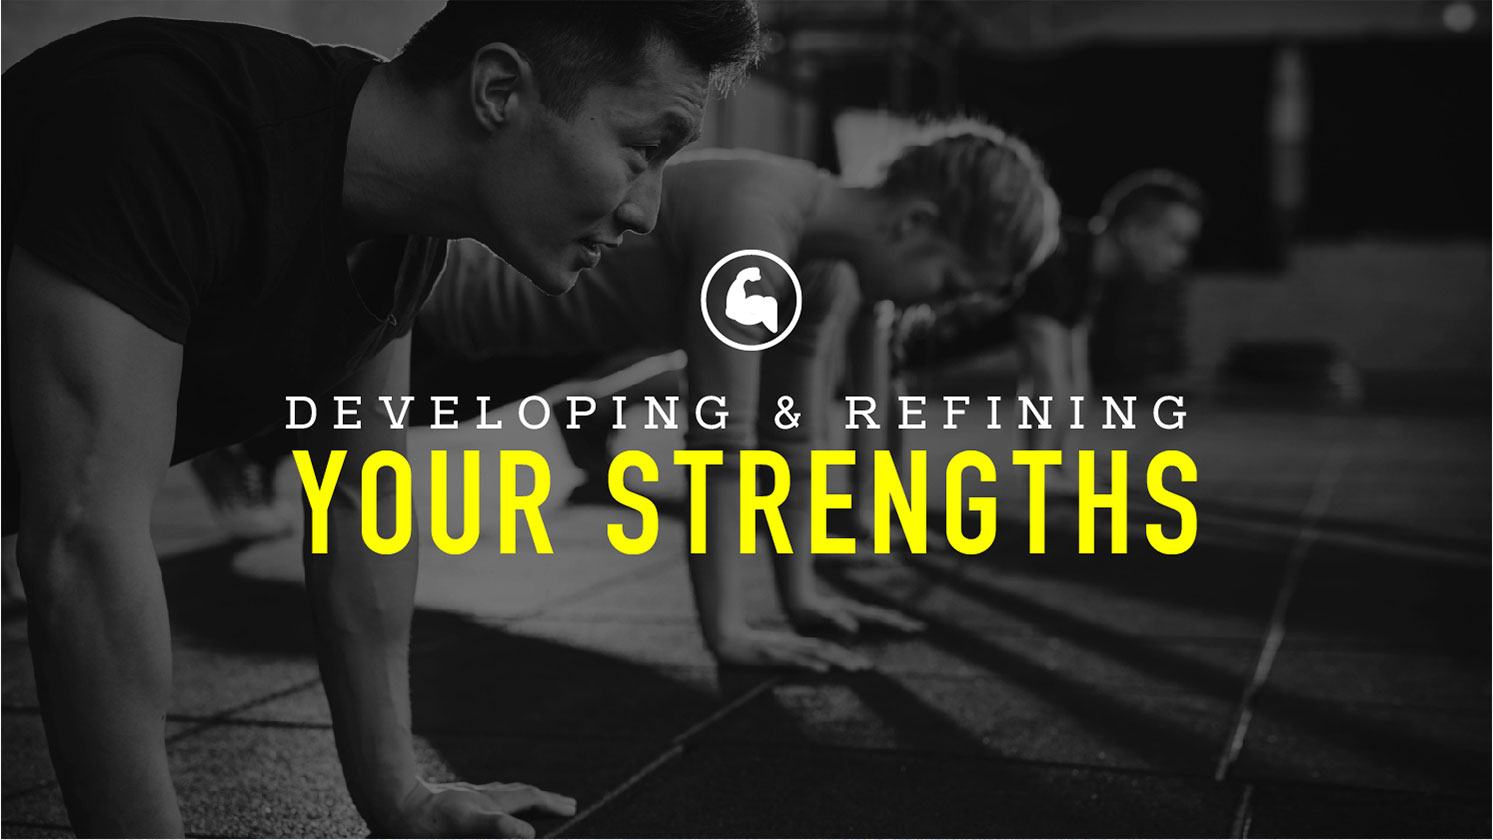 Developing & Refining Your Strengths